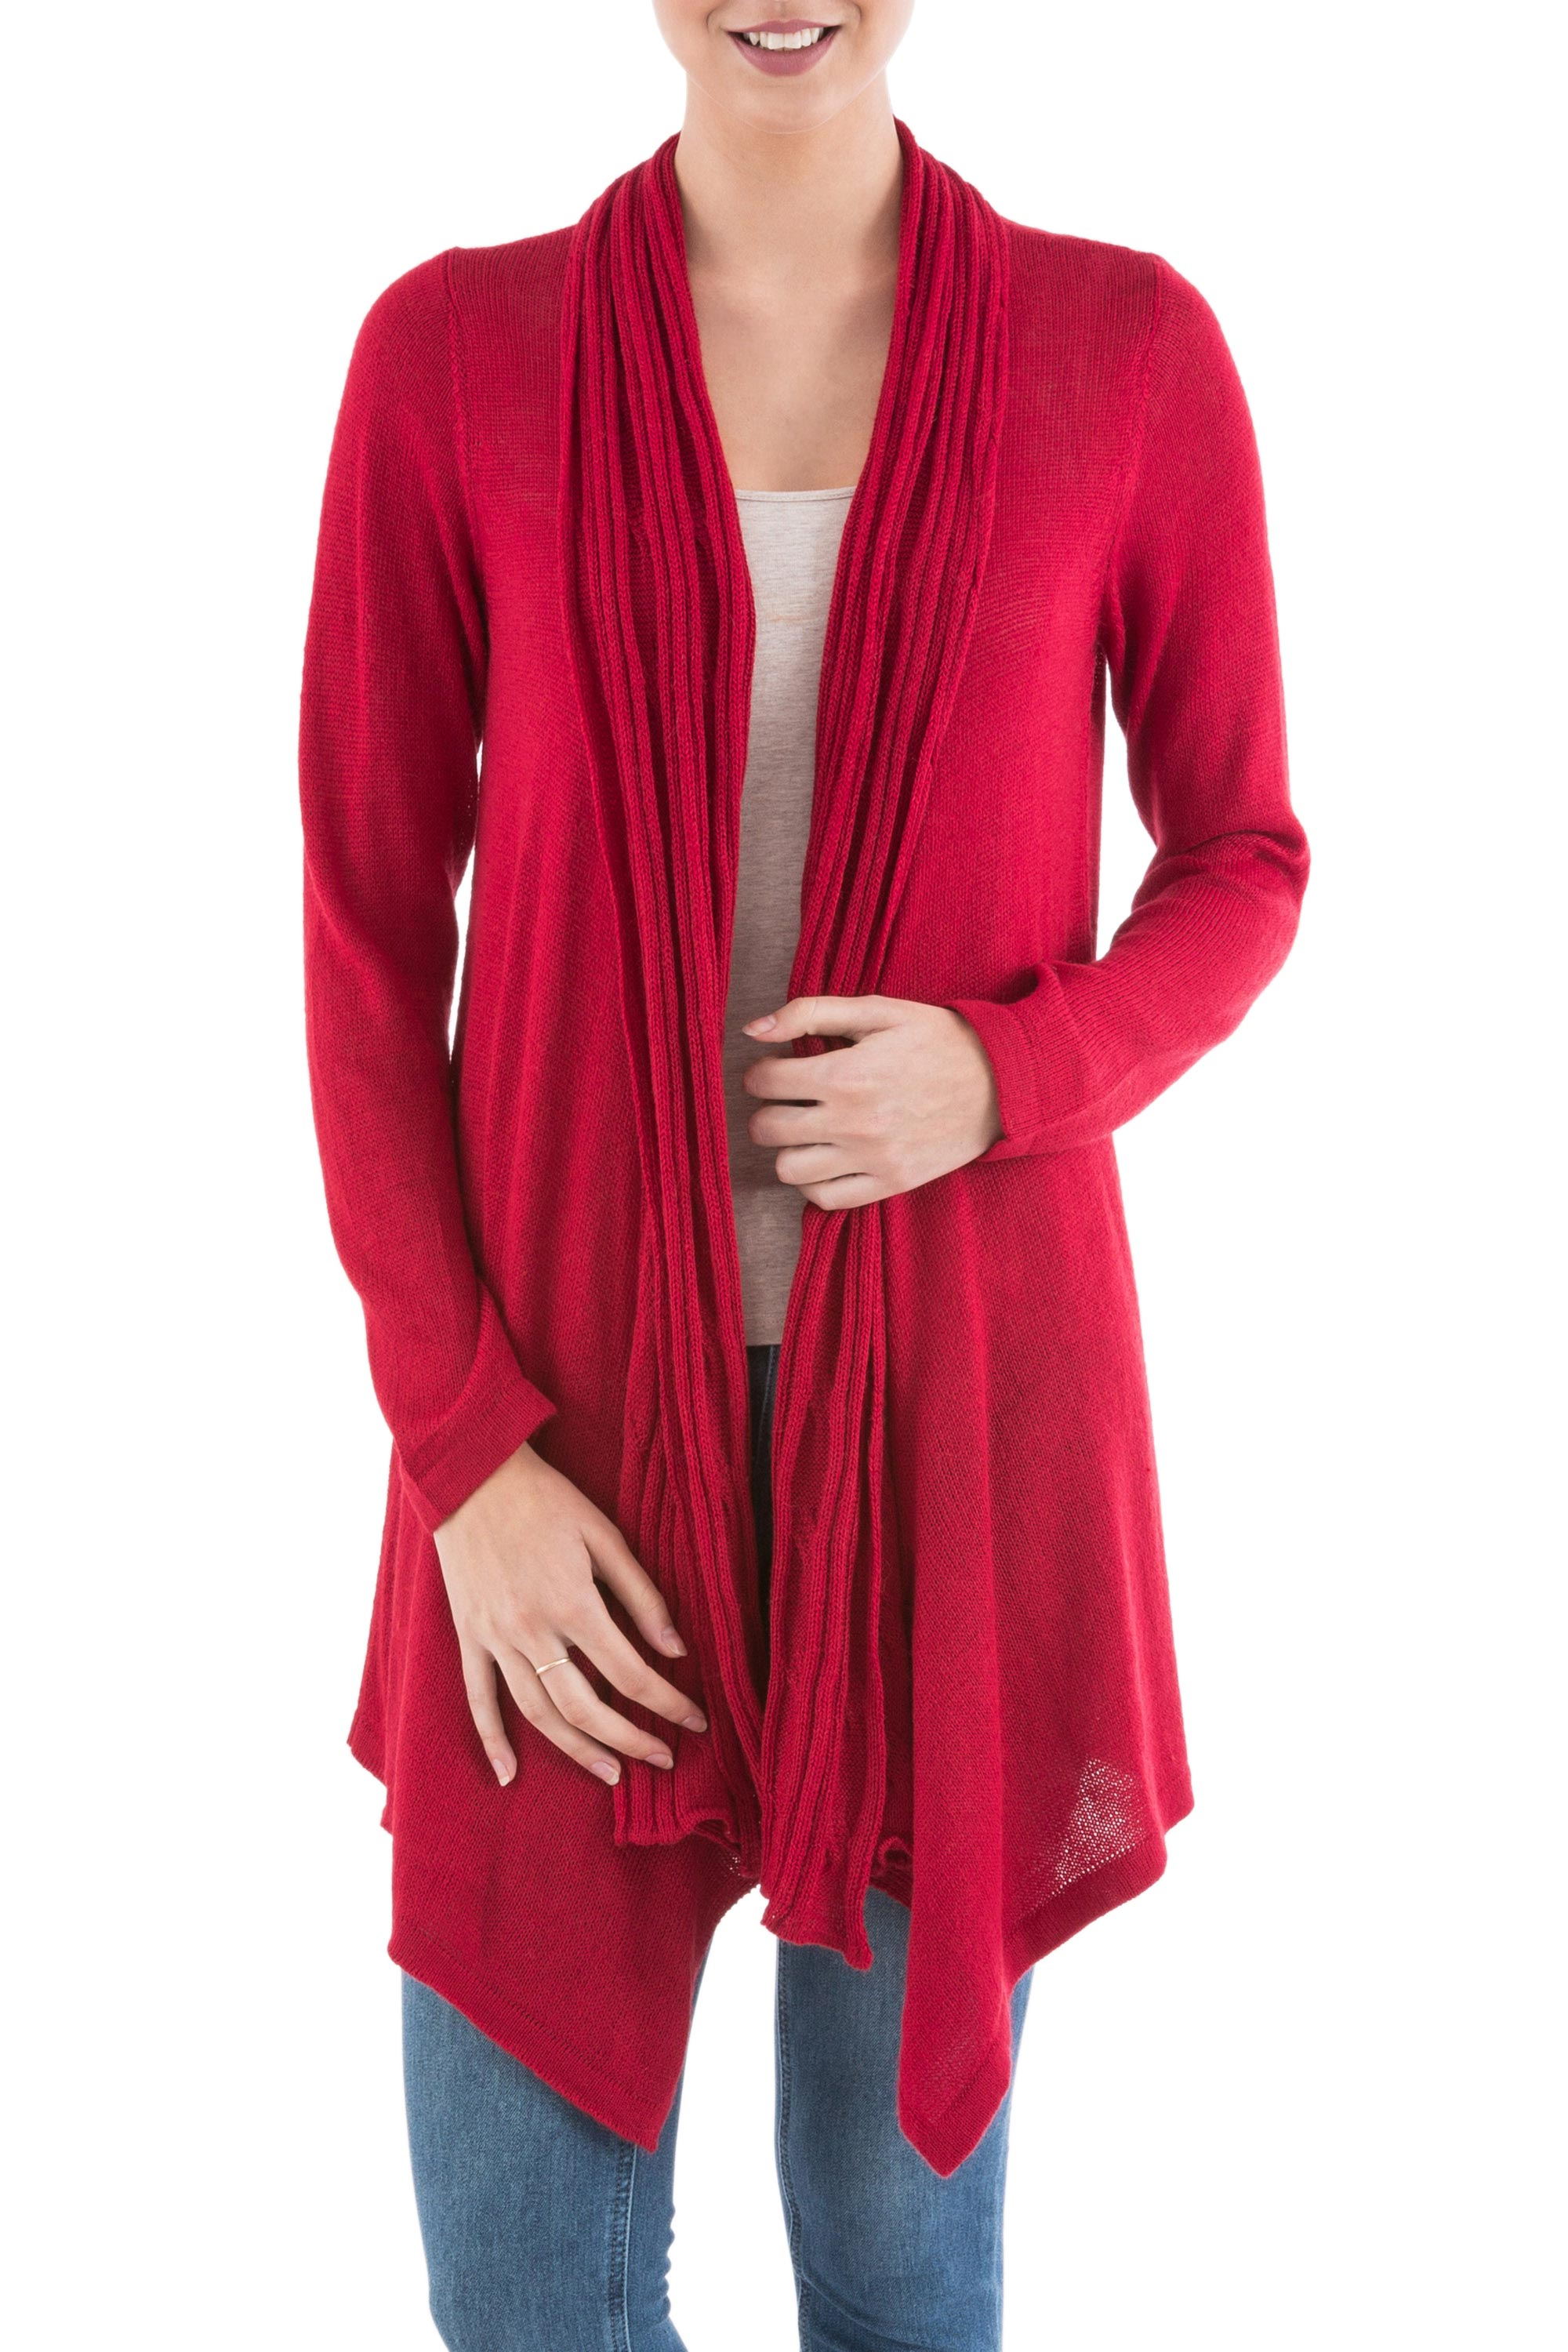 Long Sleeved Red Cardigan Sweater from Peru - Red Waterfall Dream | NOVICA